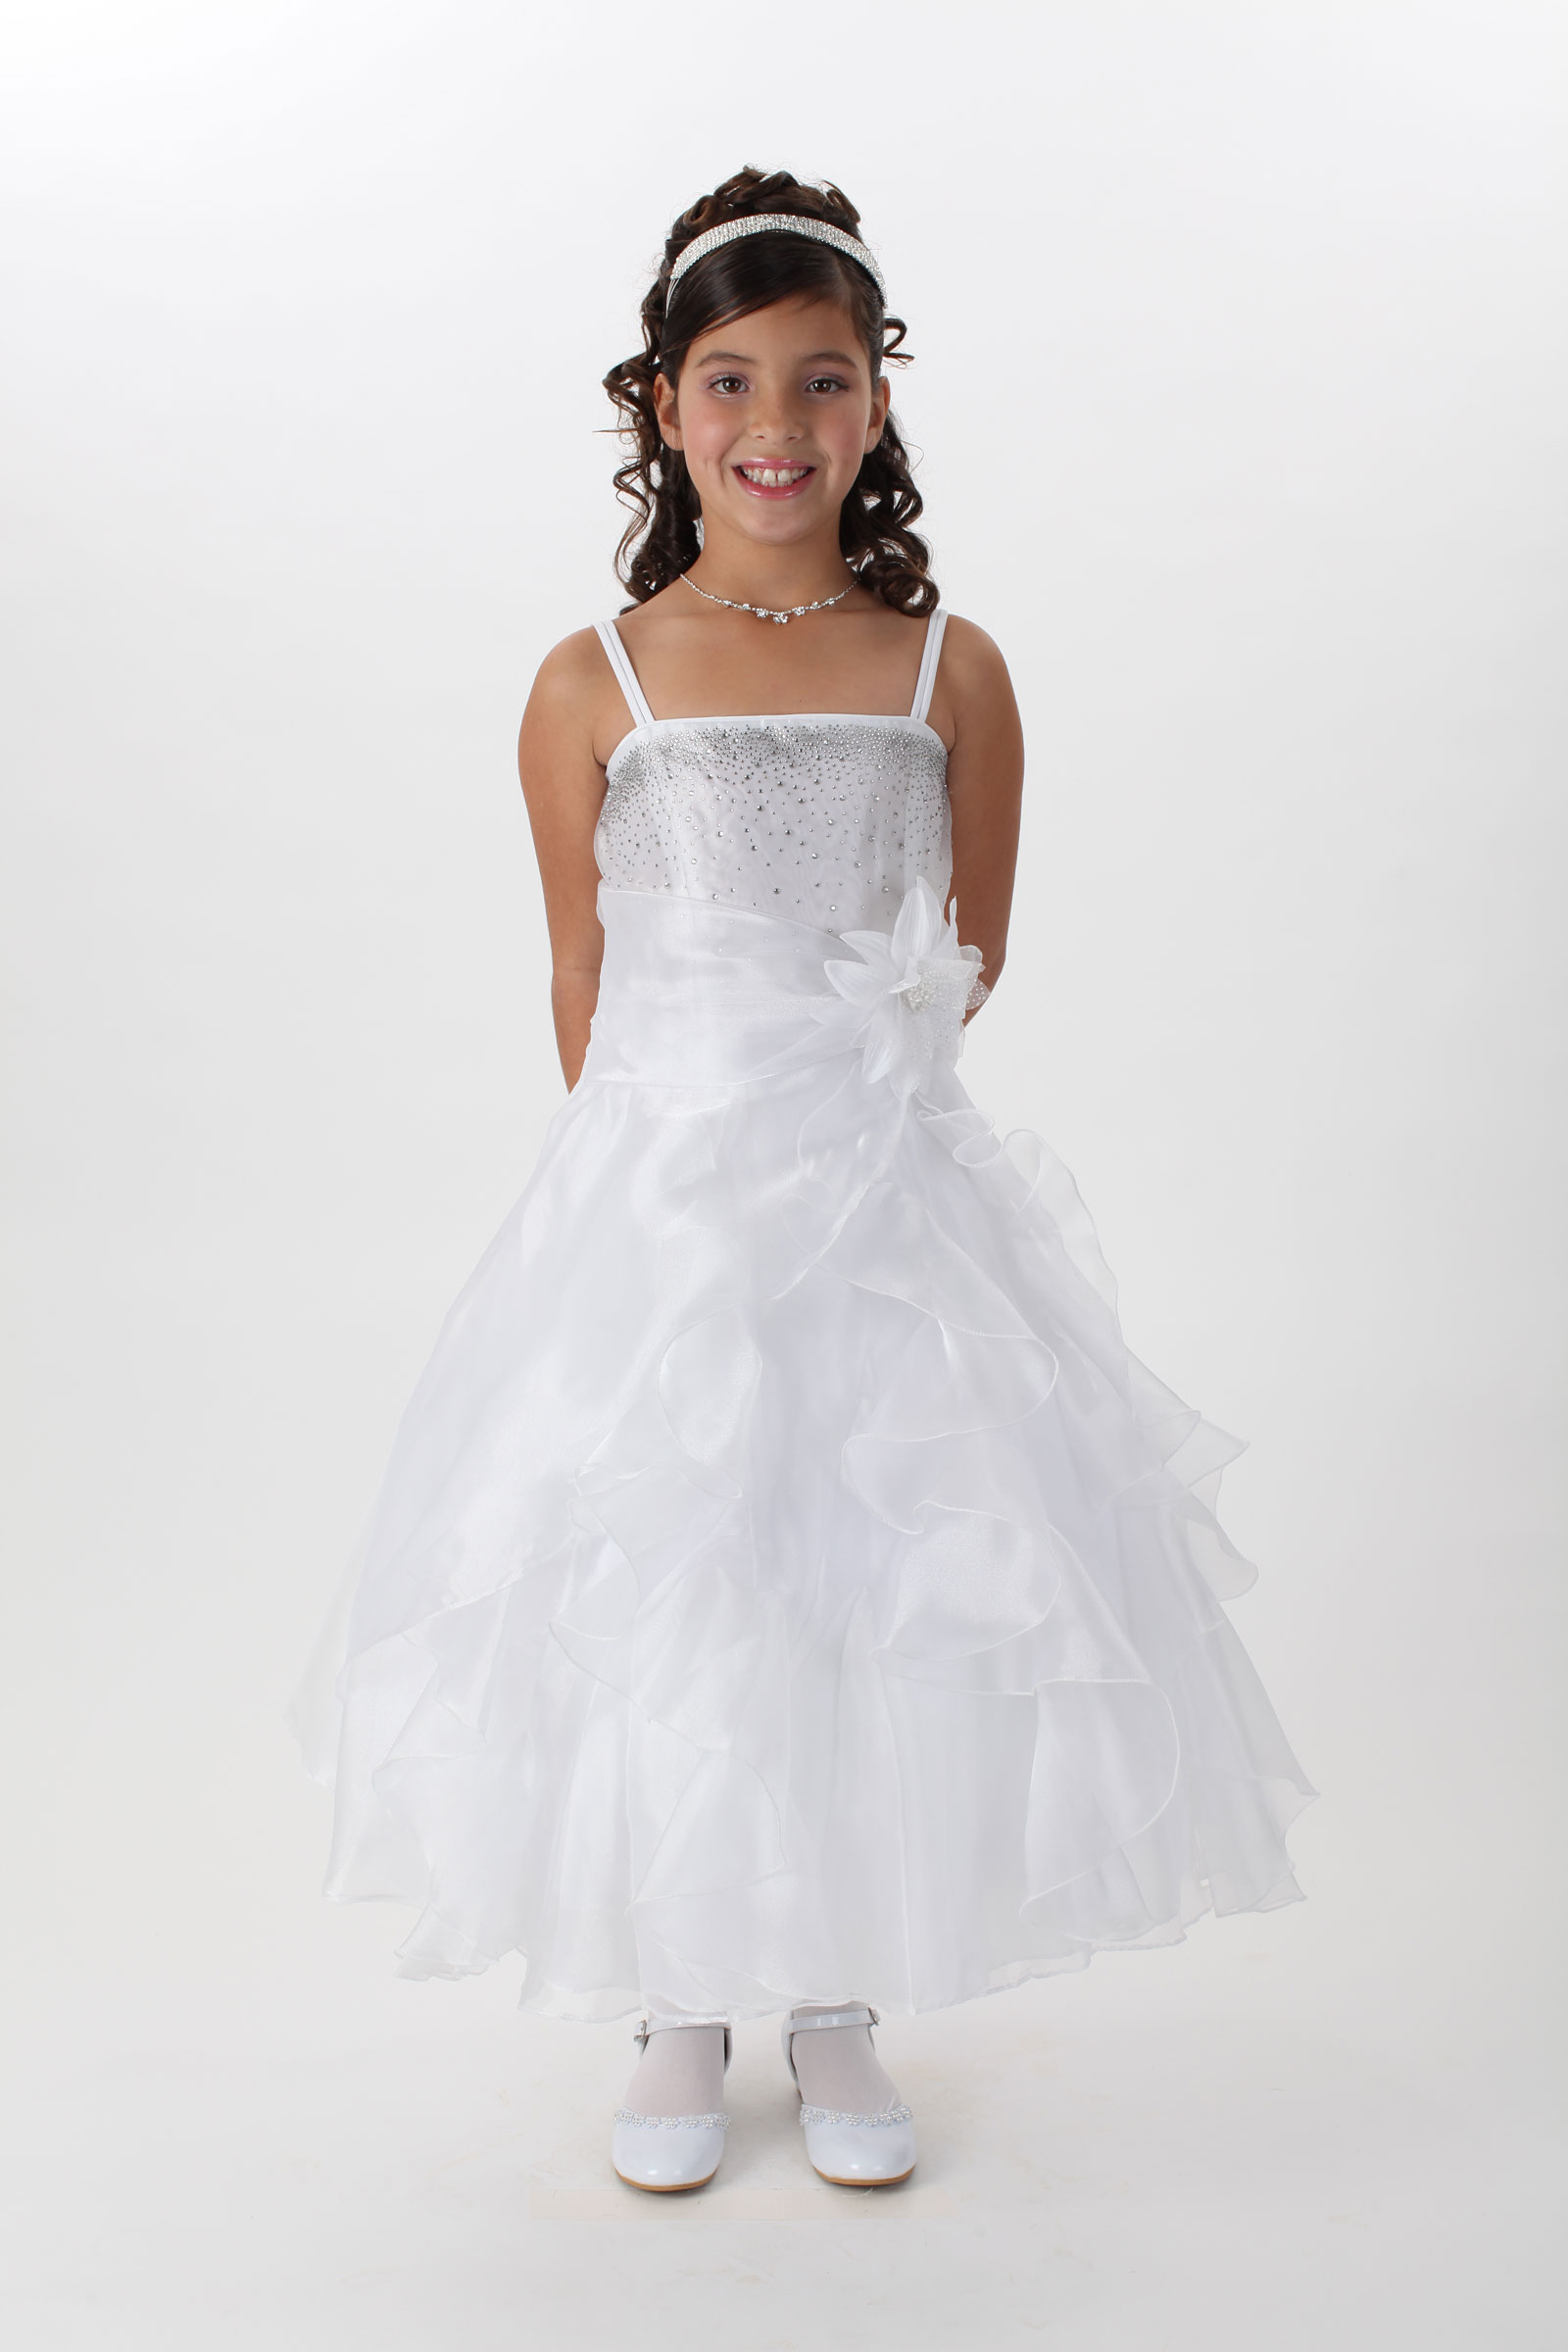 Cc1101 Girls Dress Style 1101 Organza And Beaded Satin Bodice Dress See All Dresses